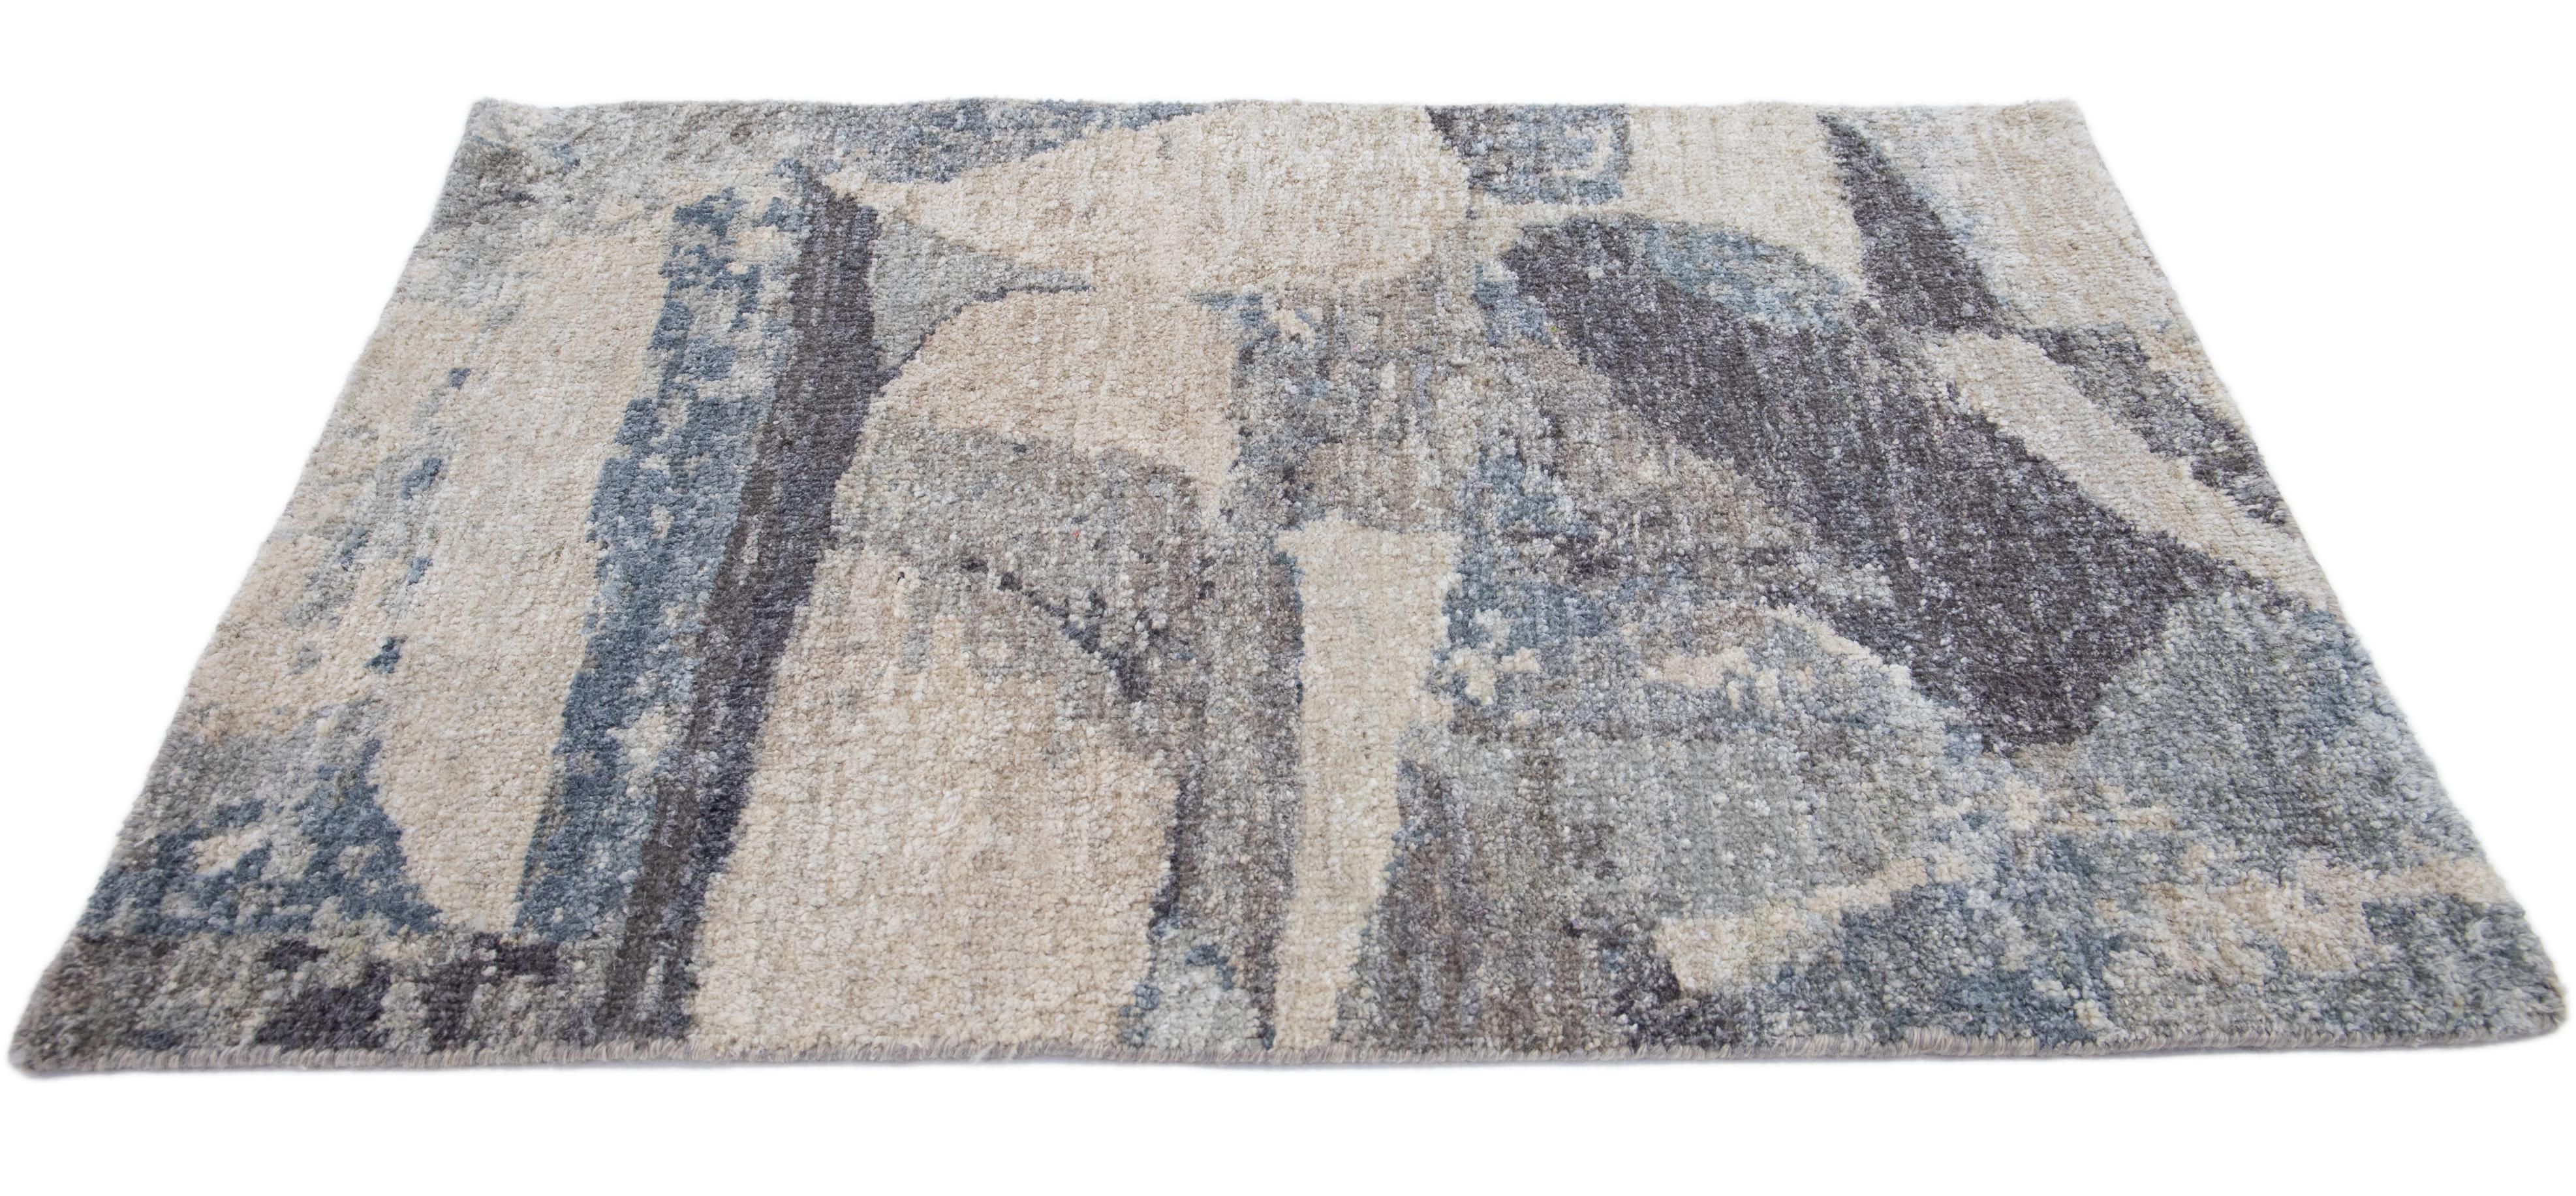 Apadana's Modern custom rug. Custom sizes and colors made-to-order. 

Material: Wool & Silk
Techniques: Hand-knotted
Style: Modern- Abstract
Lead time: Approx. 15-16 wks available 
Colors: As shown, other custom colors are available. 
Origen: